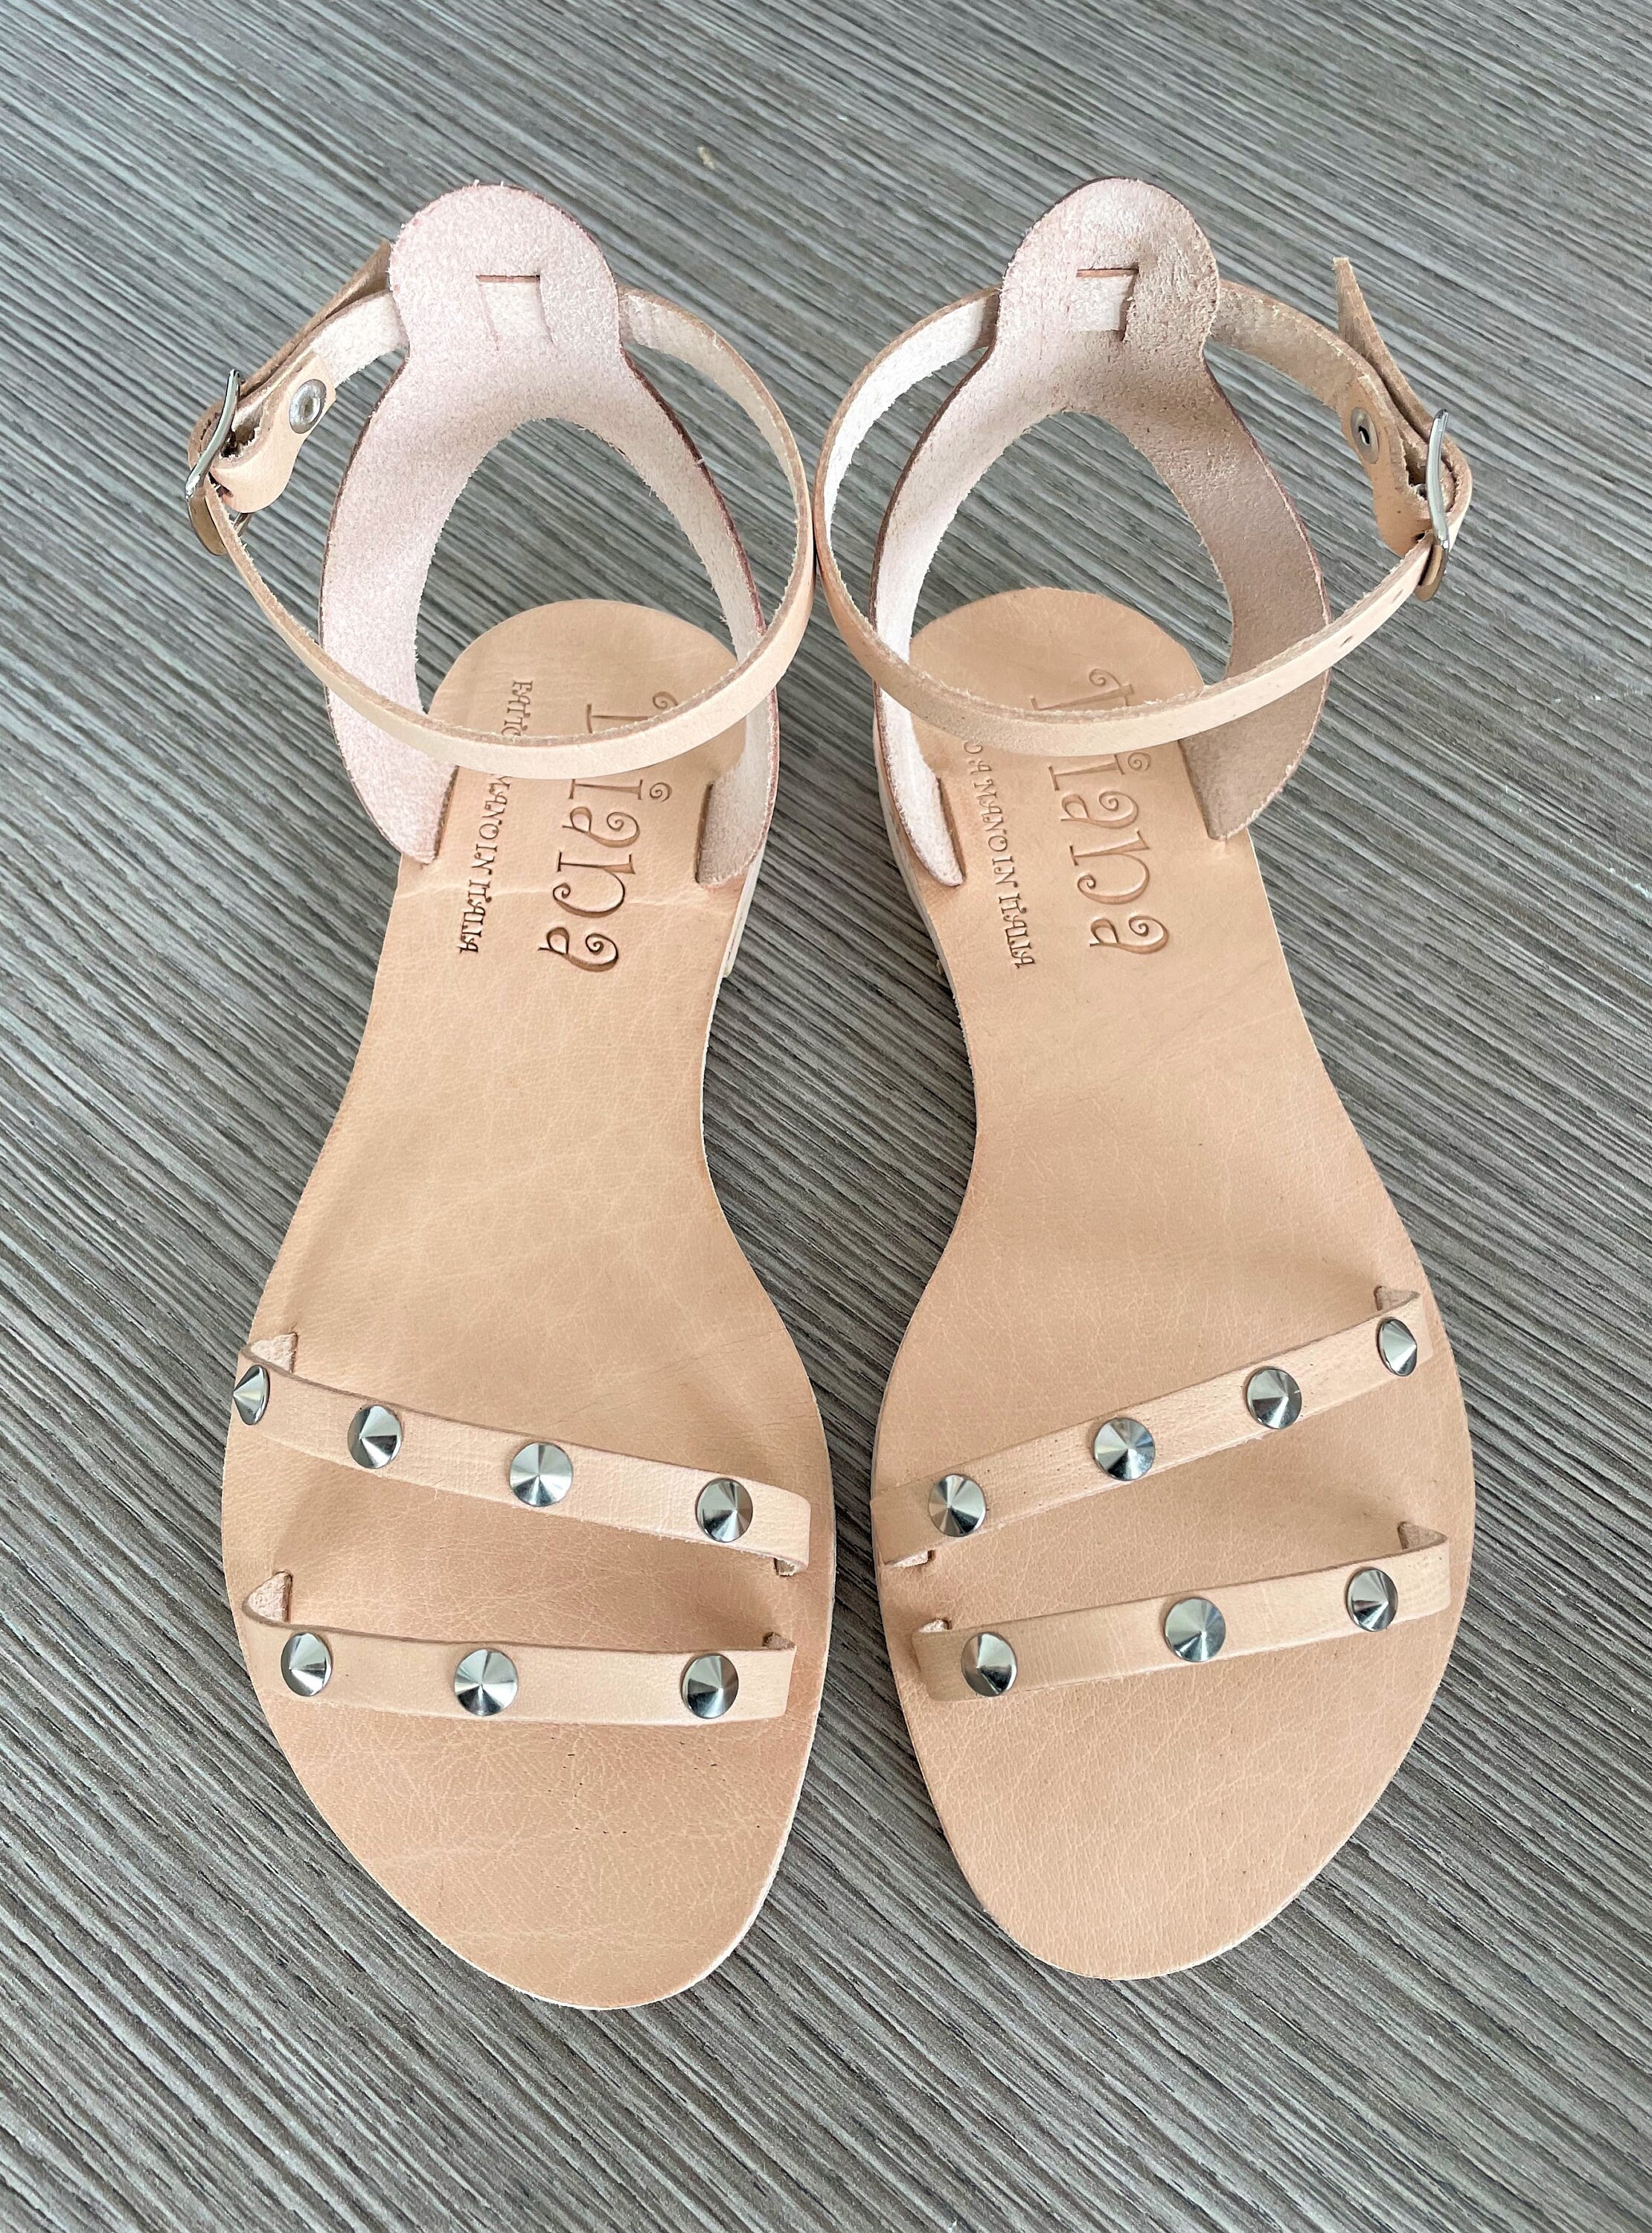 handmade women's sandals real leather made in italy leather leather sandals leather sandals